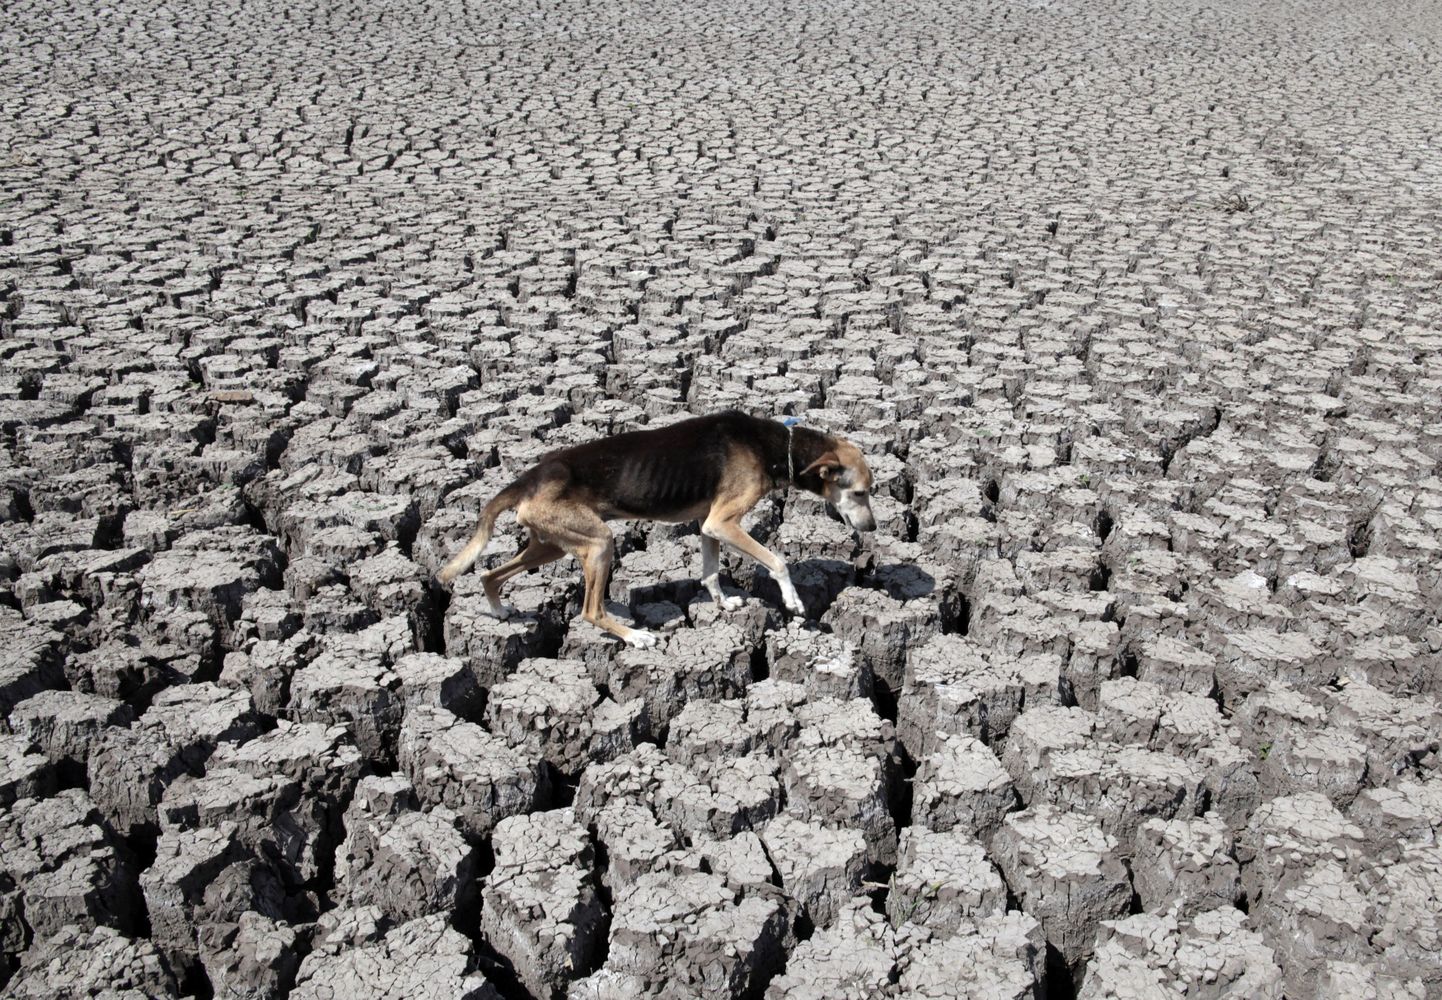 A dog walks on cracked ground at the Las Canoas dam, some 59 km (37 miles) north of the capital Managua April 26, 2013. A large area of the dam has been dry since last February, as most of its water have been used by rice farmers for their crops, affecting around hundreds of peasants living in the area, according to local media. REUTERS/Oswaldo Rivas (NICARAGUA - Tags: ENVIRONMENT AGRICULTURE BUSINESS ANIMALS)